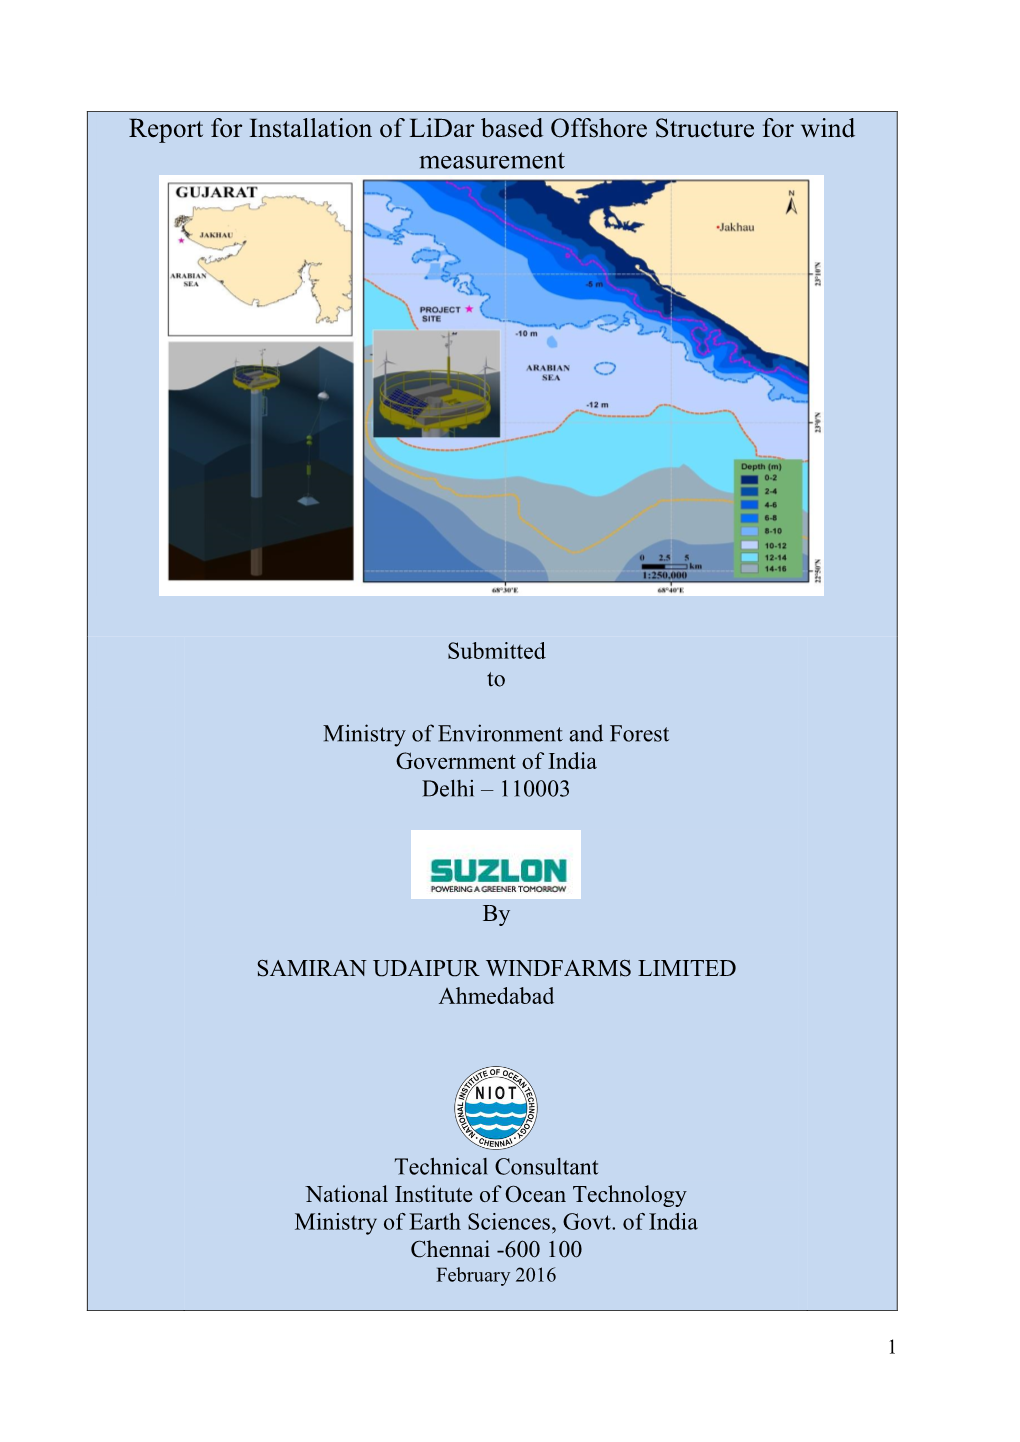 Report for Installation of Lidar Based Offshore Structure for Wind Measurement